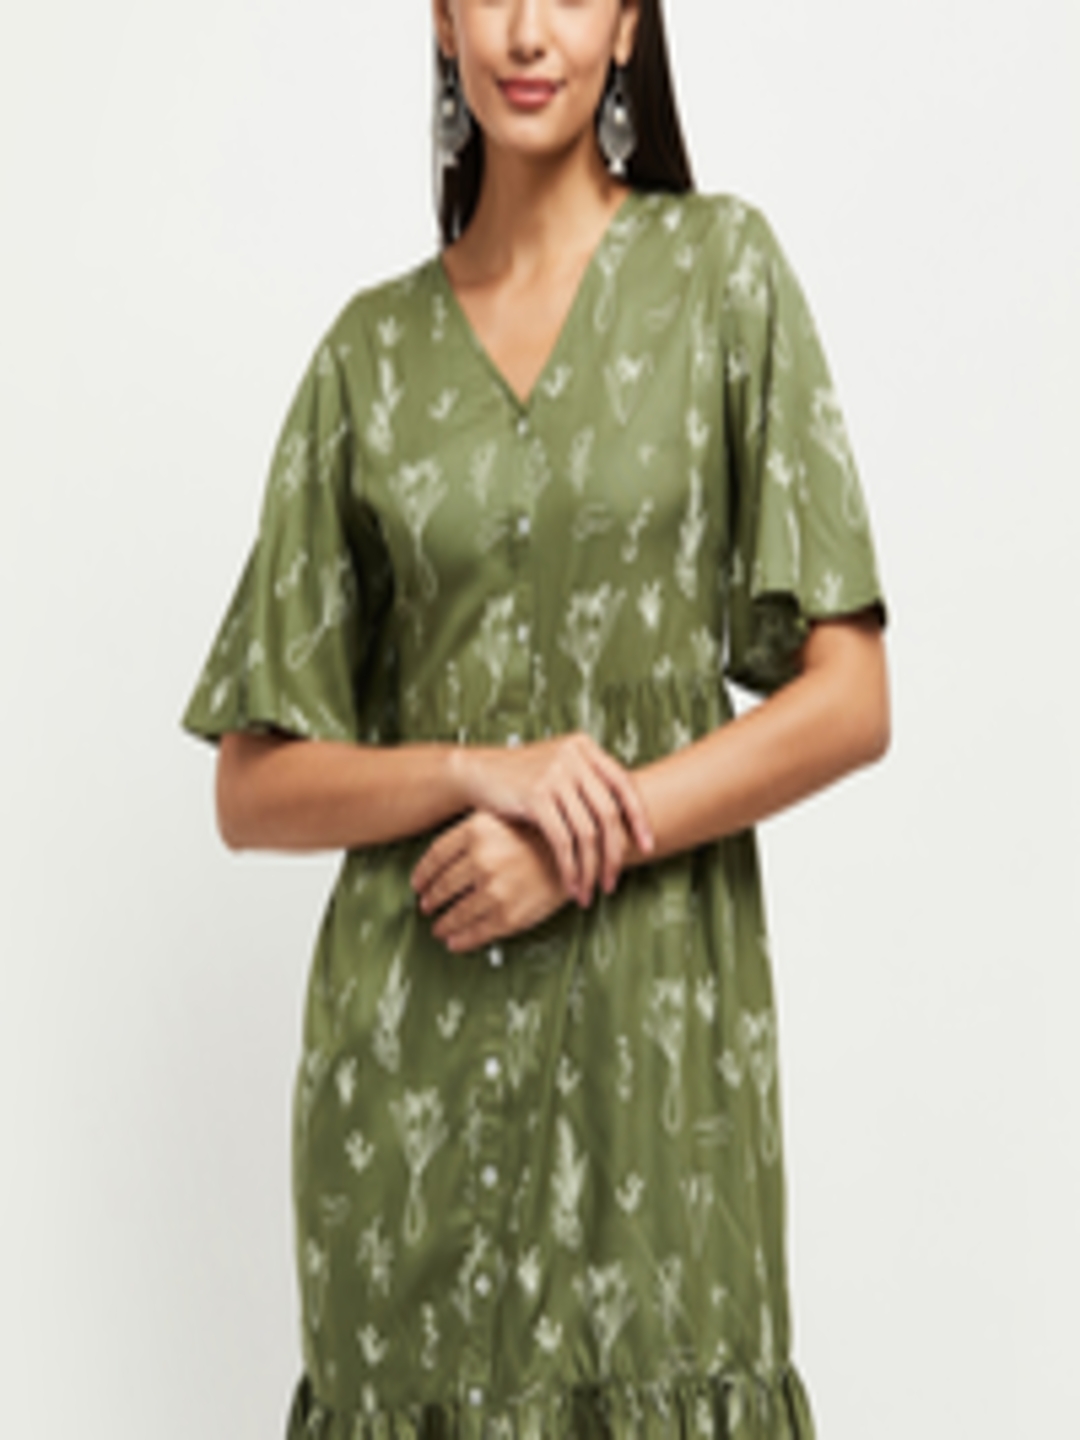 Buy Max Green Floral A Line Dress - Dresses for Women 18226174 | Myntra